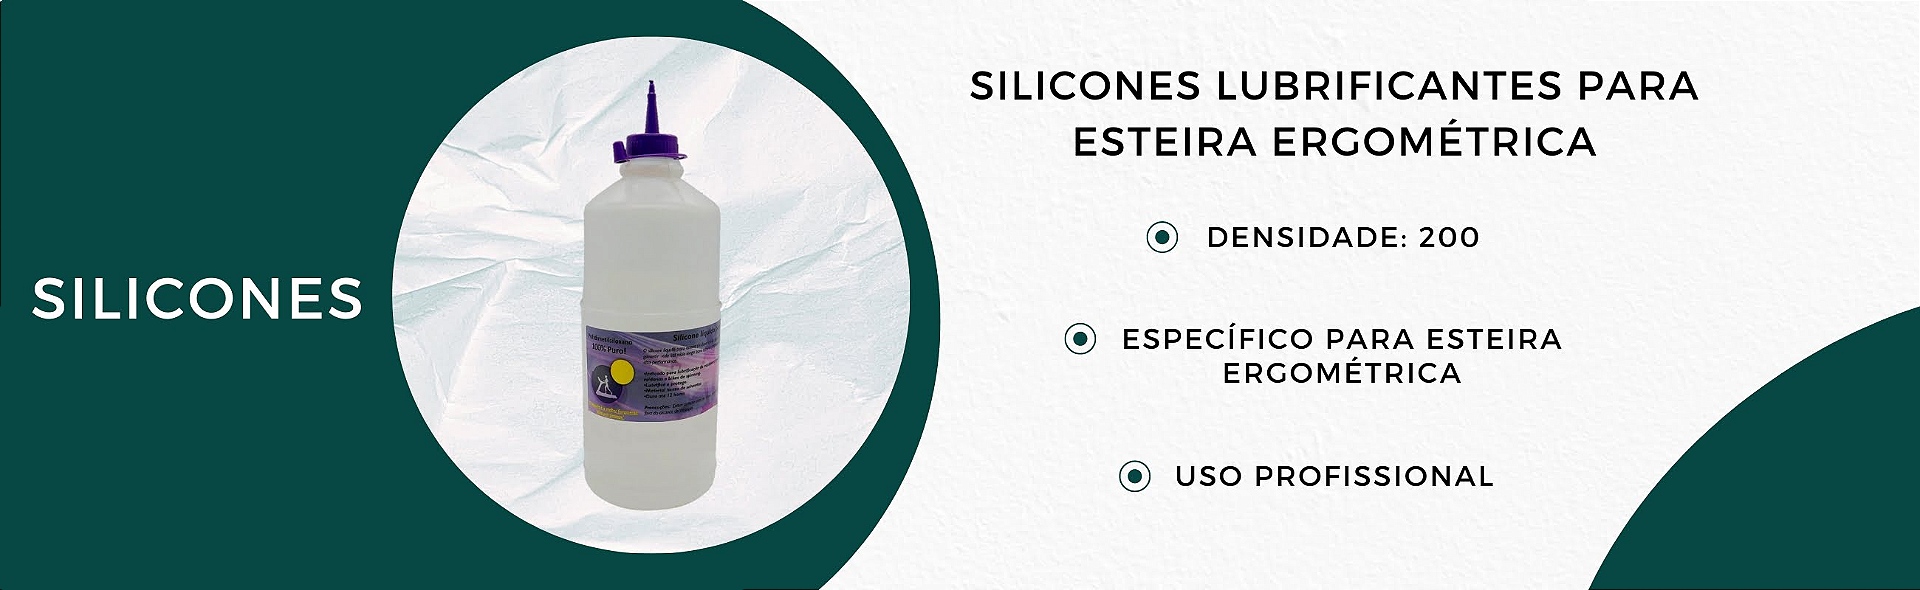 BANNER SILICONES